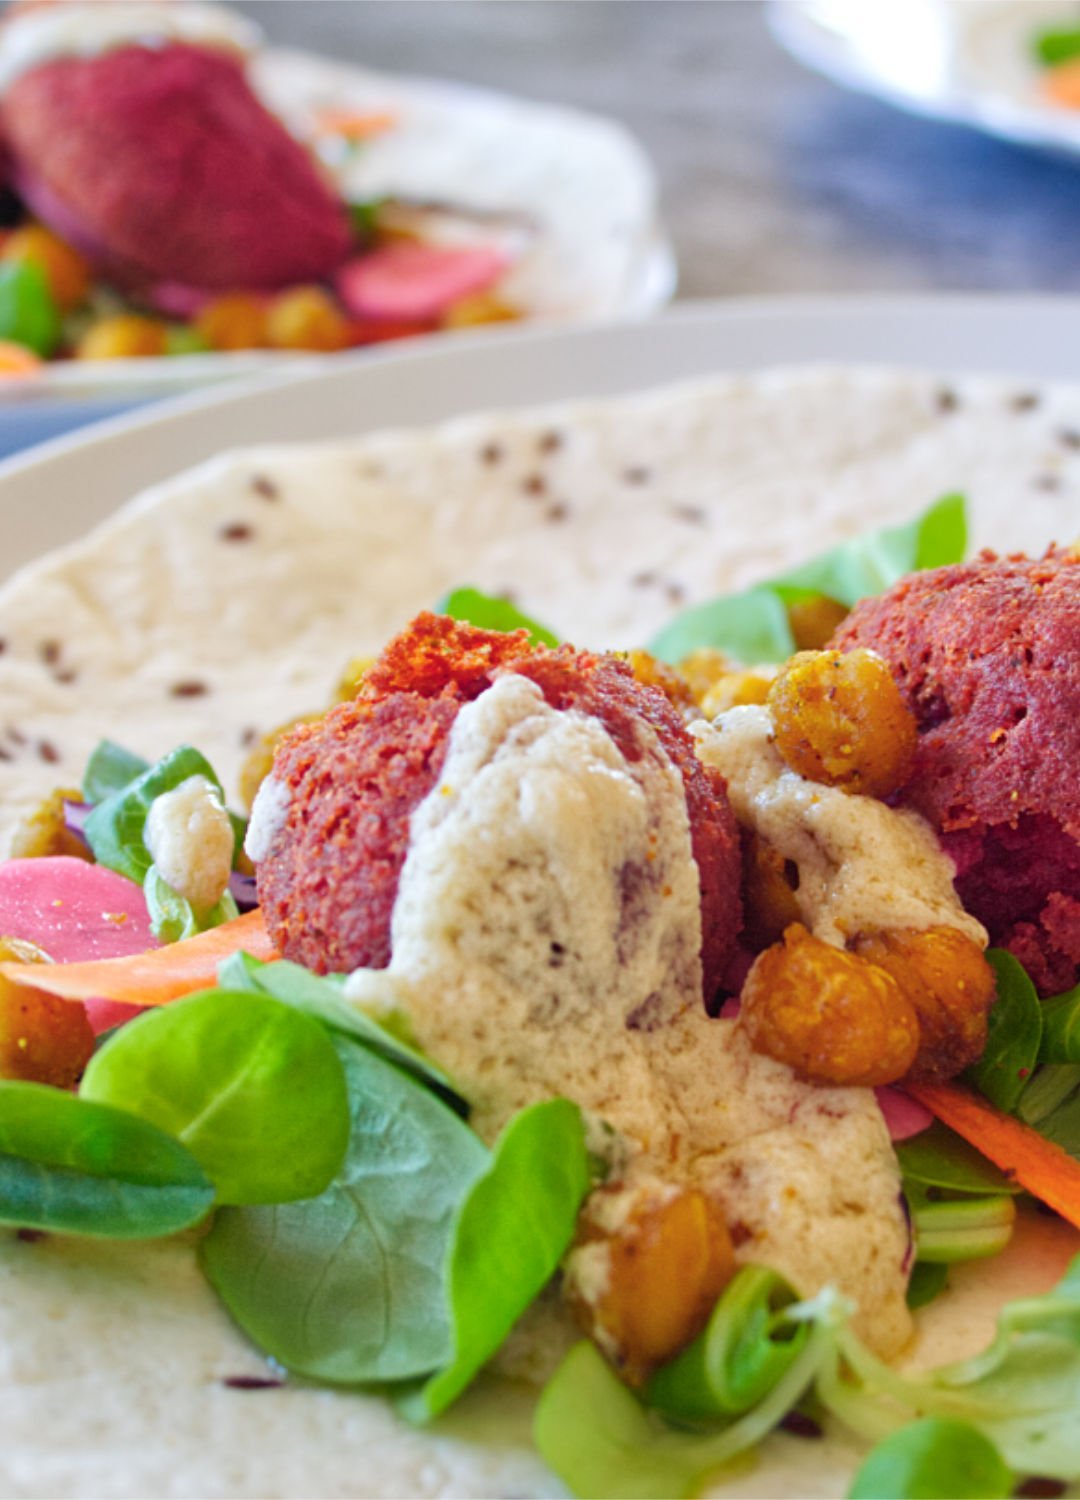 Beetroot falafels sit on a turkish wrap with some salad and topped with a few blobs of tahini sauce